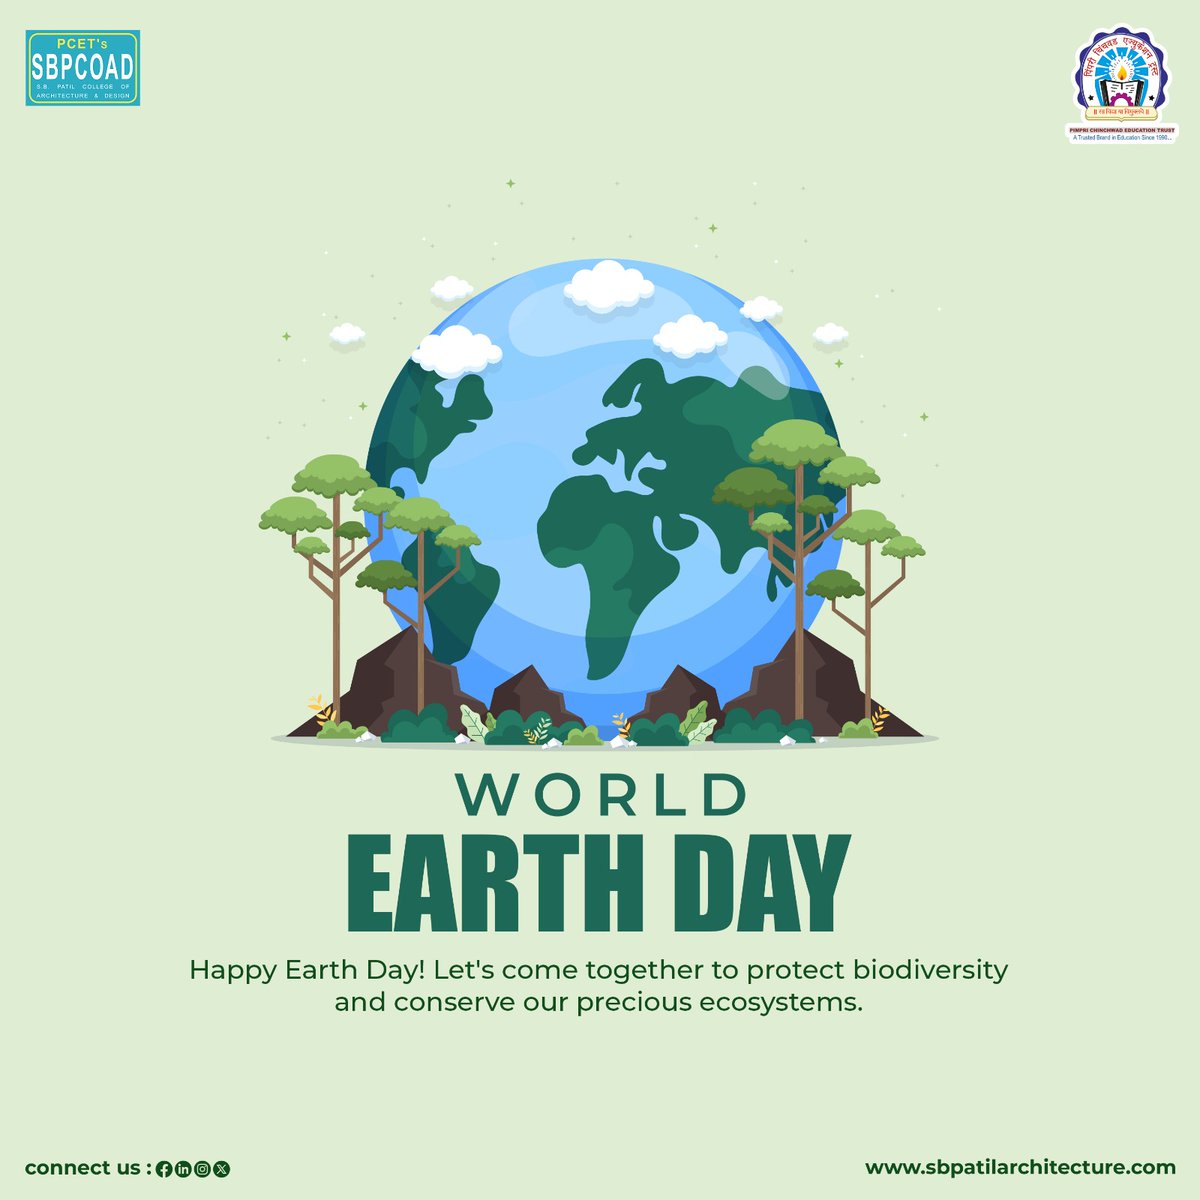 Earth: our shared home, our collective responsibility. 🌍📷Let's cultivate knowledge, inspire action, and nurture a sustainable future for generations to come. #PCET #SBPCOAD #WorldEarthDay #WorldEarthDay2024 #ProtectOurPlanet #जागतिकवसुंधरादिन #पृथ्वीदिन #EarthDay #EarthDay2024